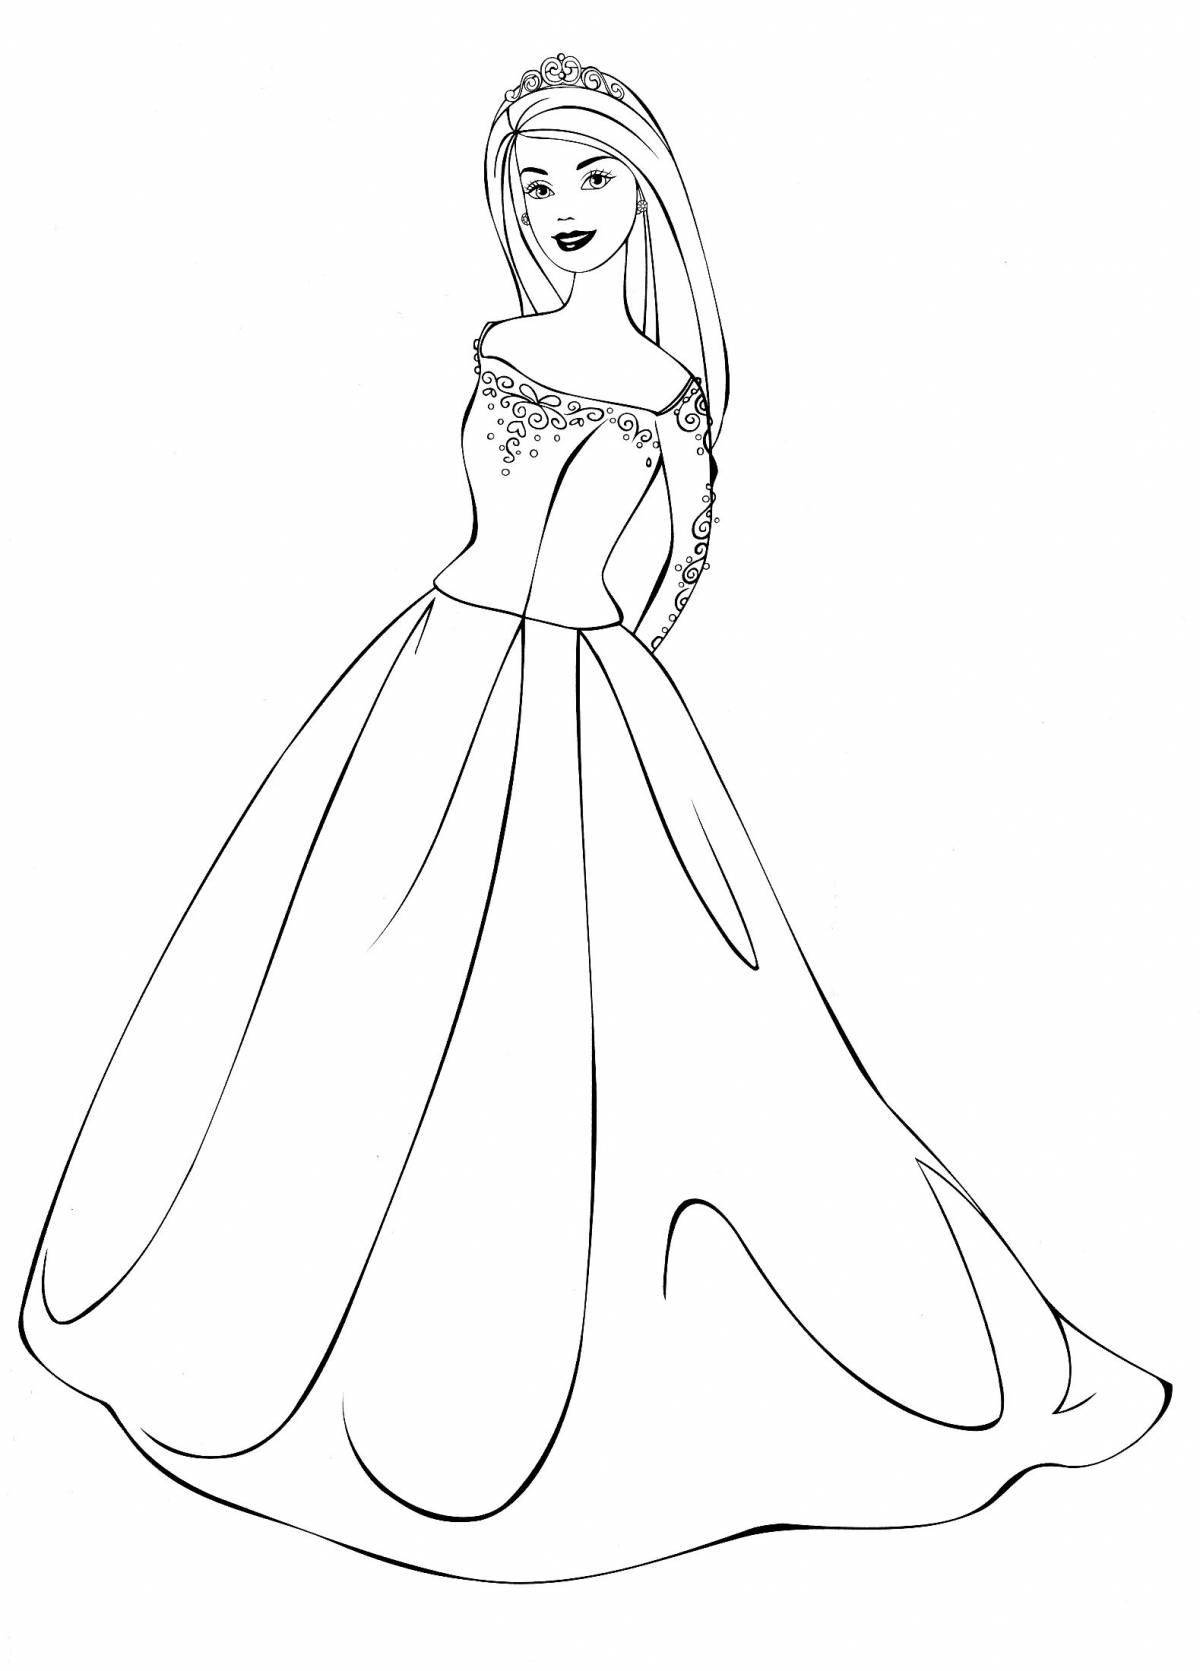 Wonderful barbie princess coloring pages for girls